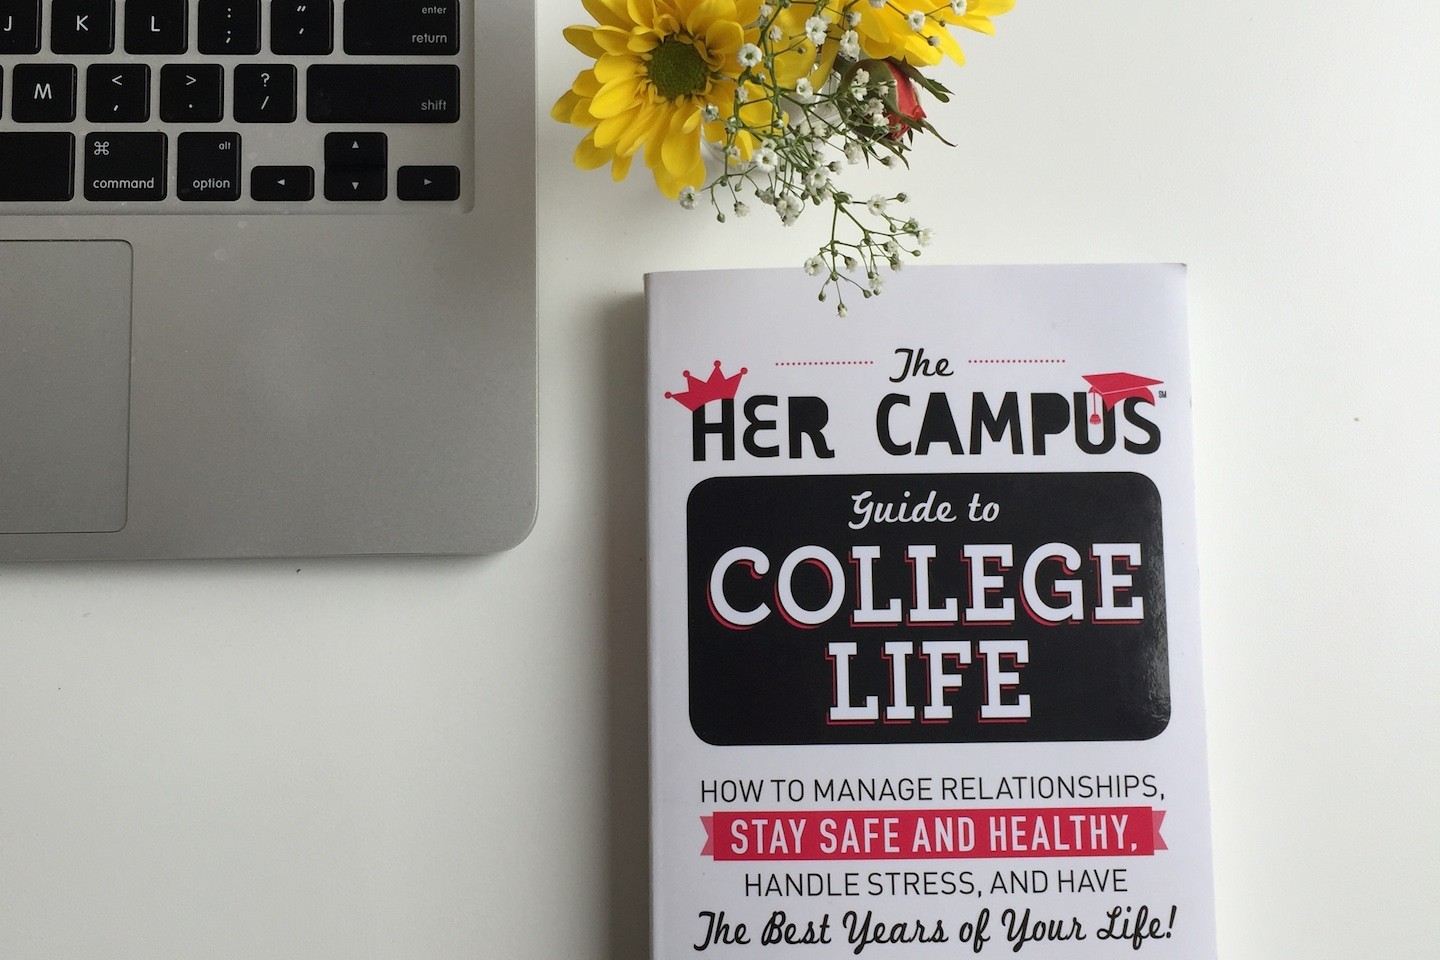 What We’re Reading: The Her Campus Guide to College Life